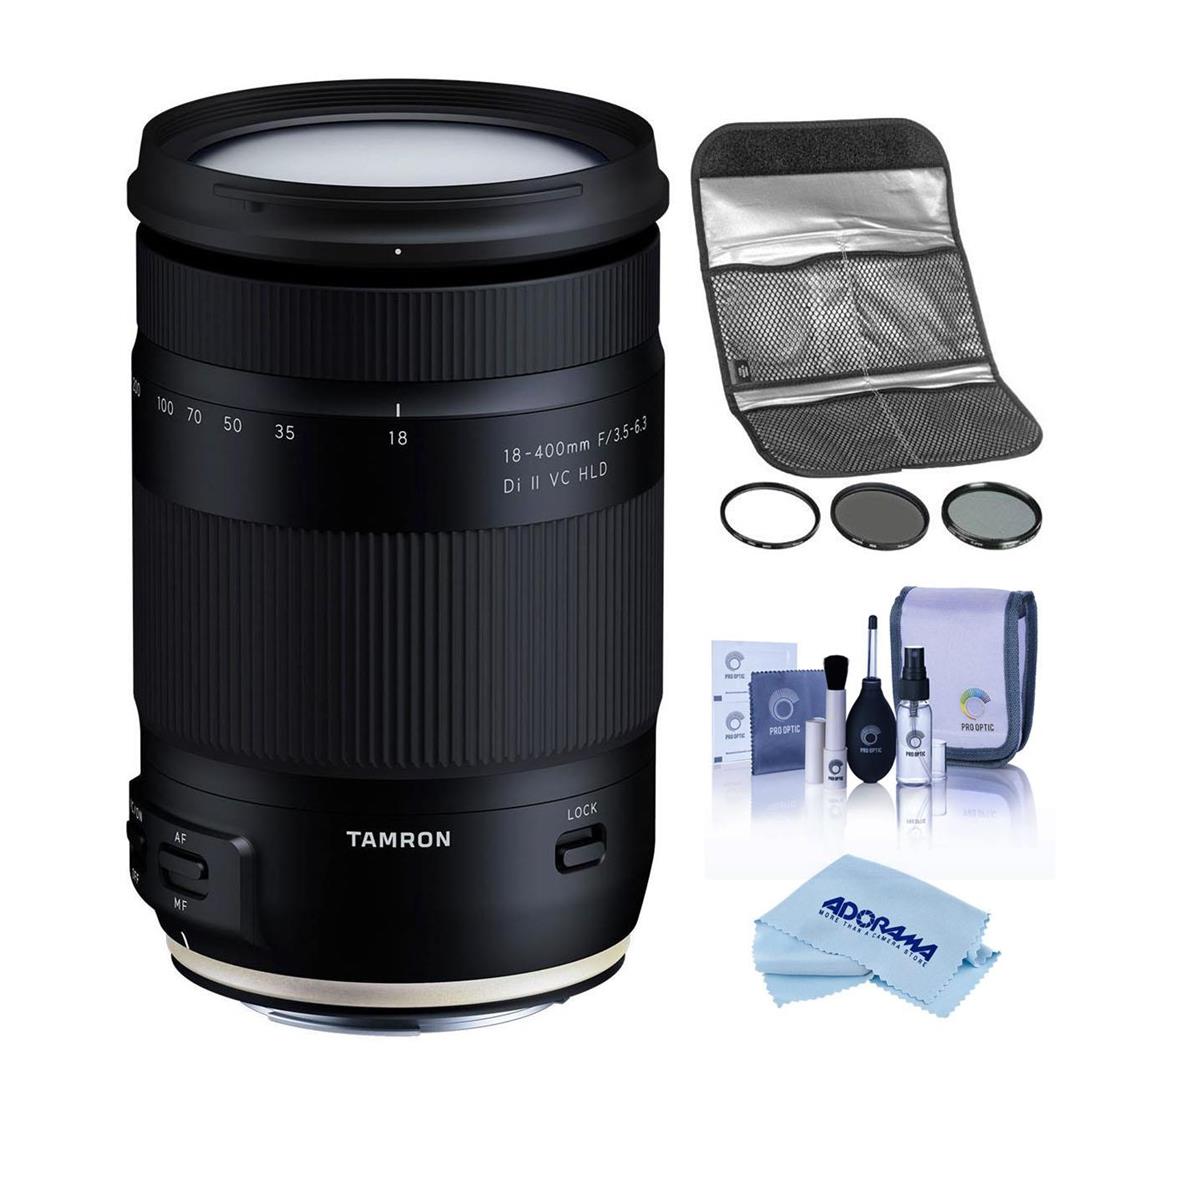 

Tamron 18-400mm f/3.5-6.3 Di II VC HLD Lens for Nikon F with Filter Kit